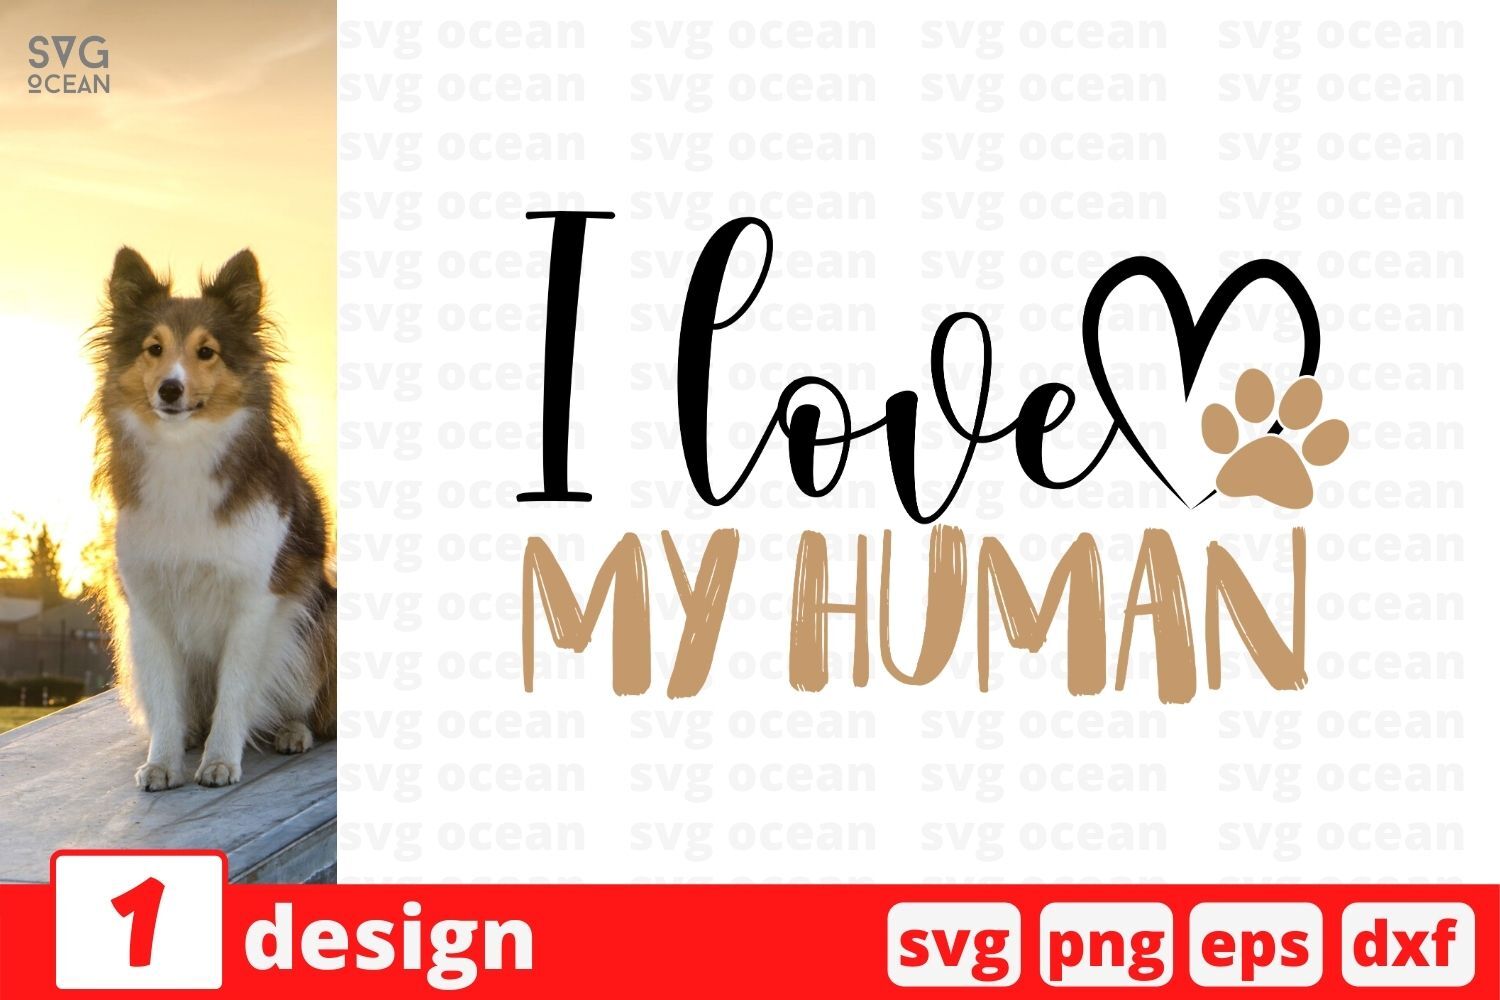 Download I Love My Human Svg Cut File By Svgocean Thehungryjpeg Com